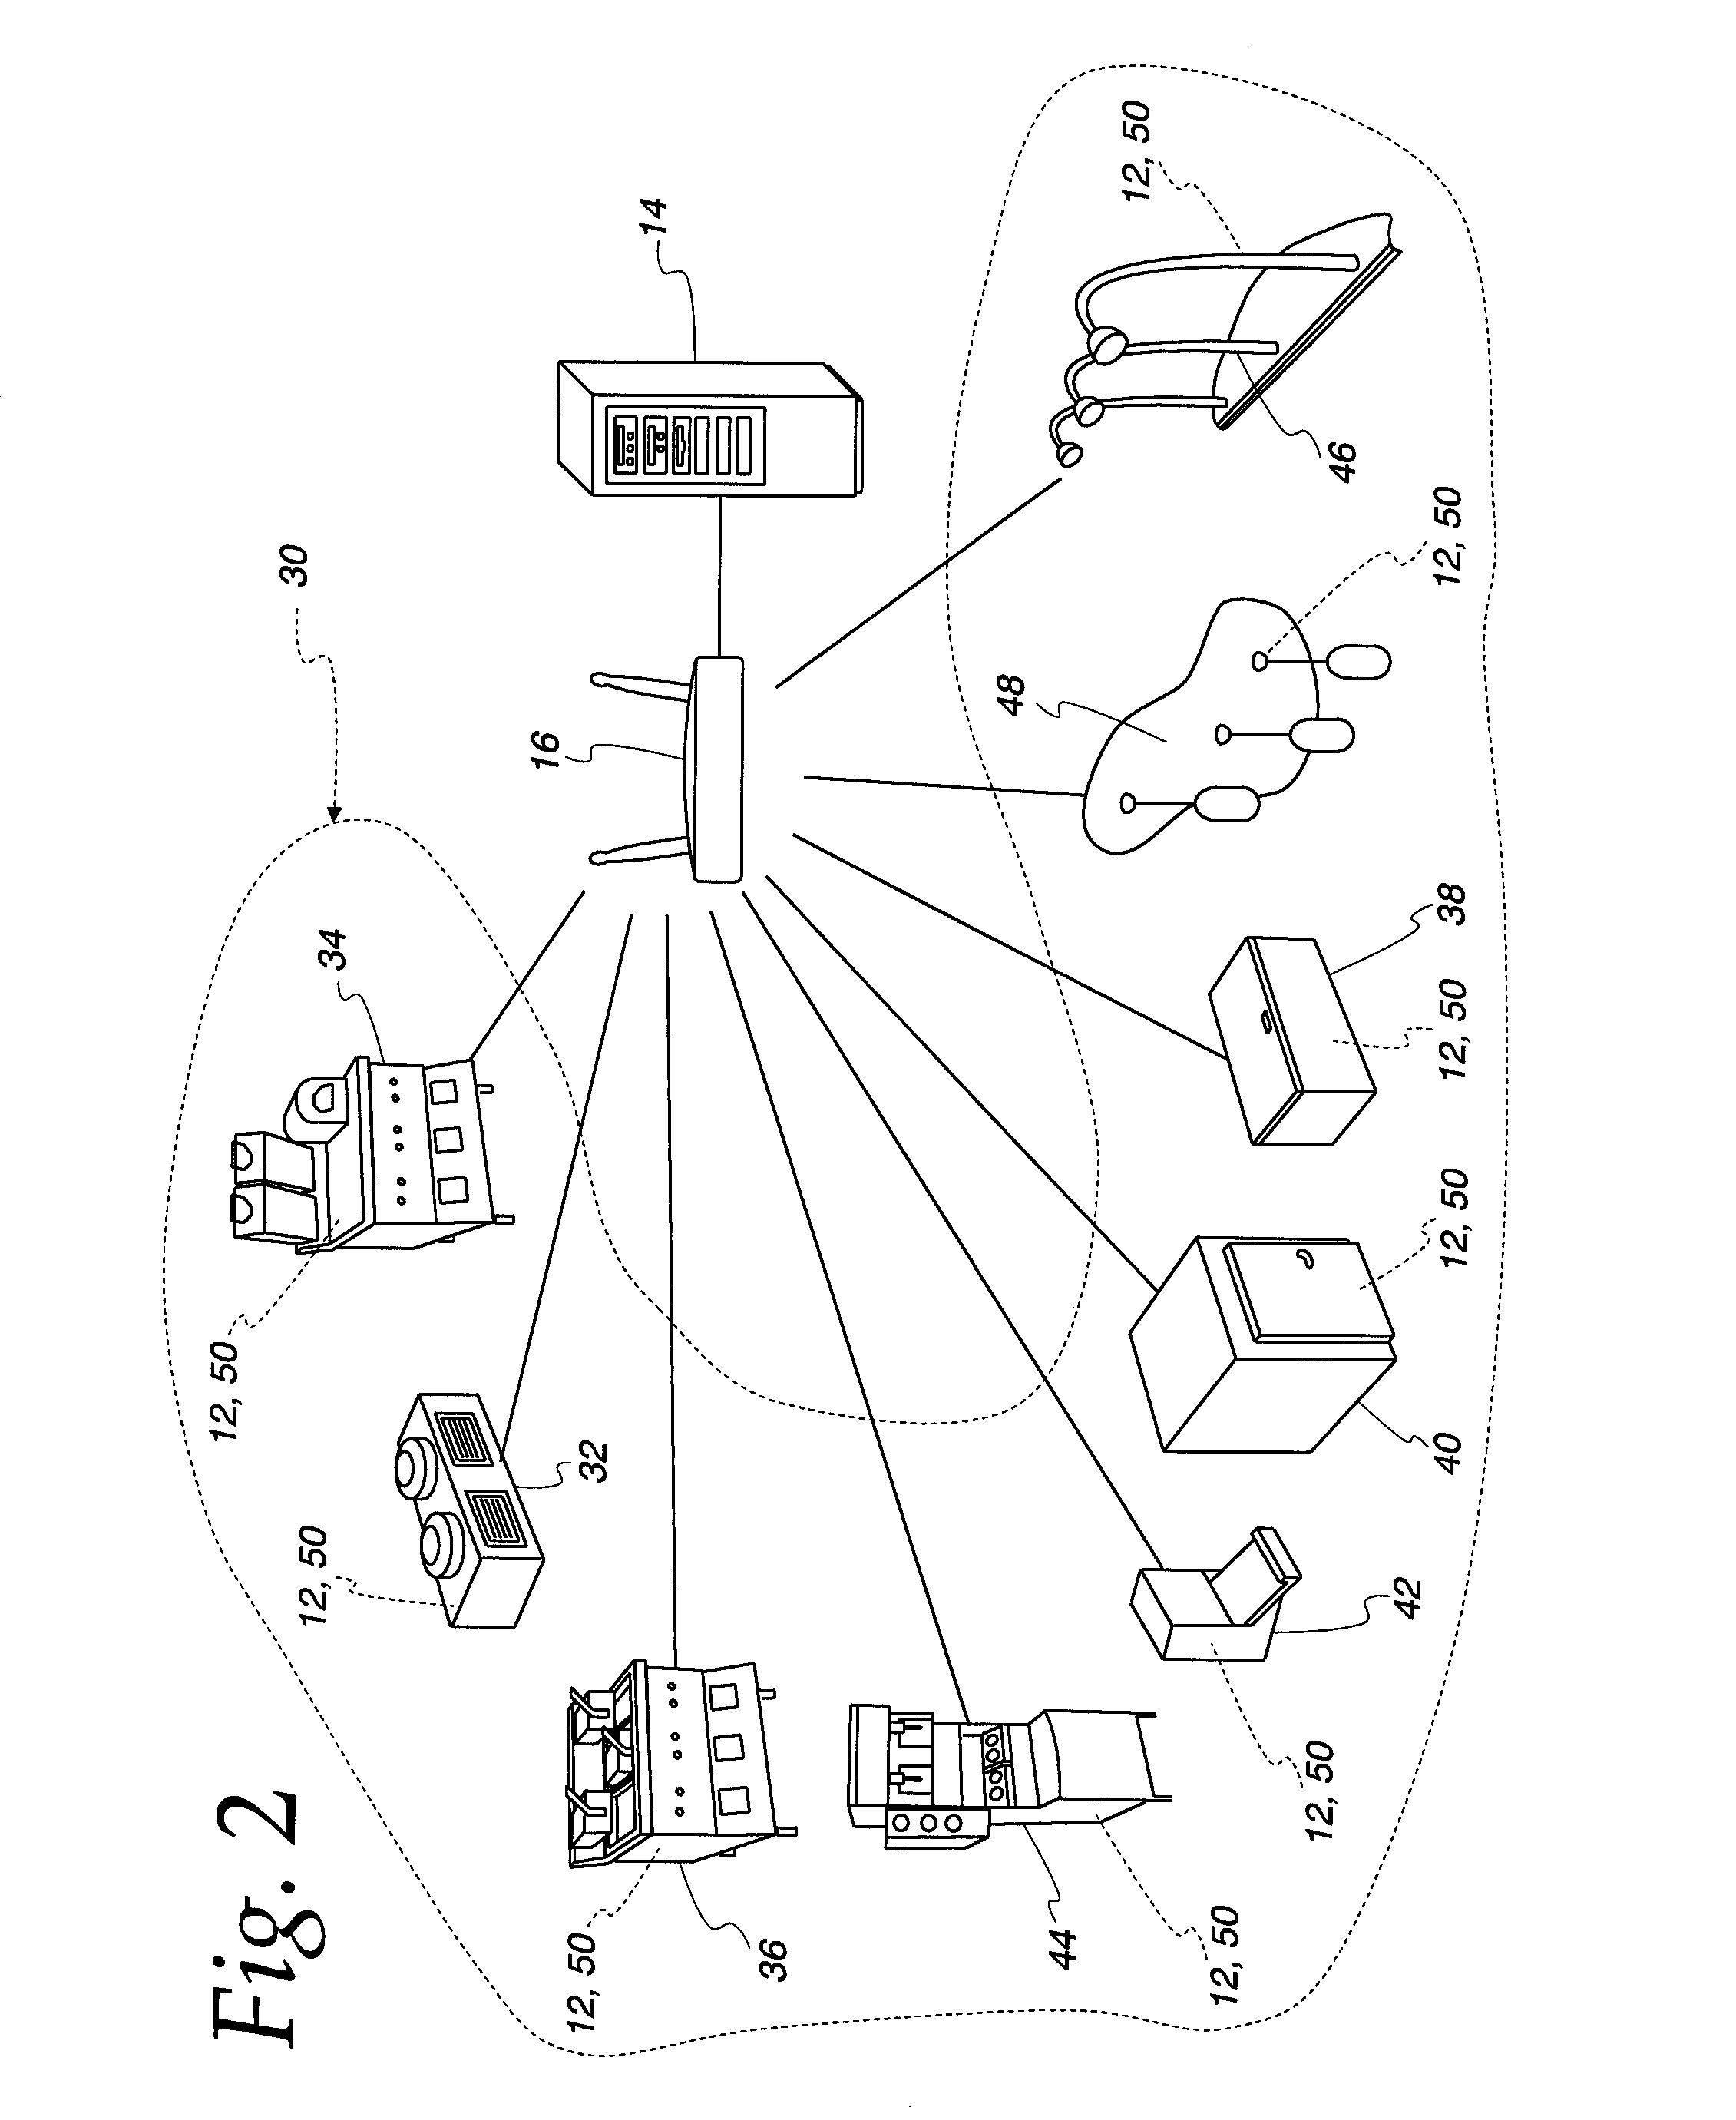 Restaurant Equipment Monitoring and Control System and Method